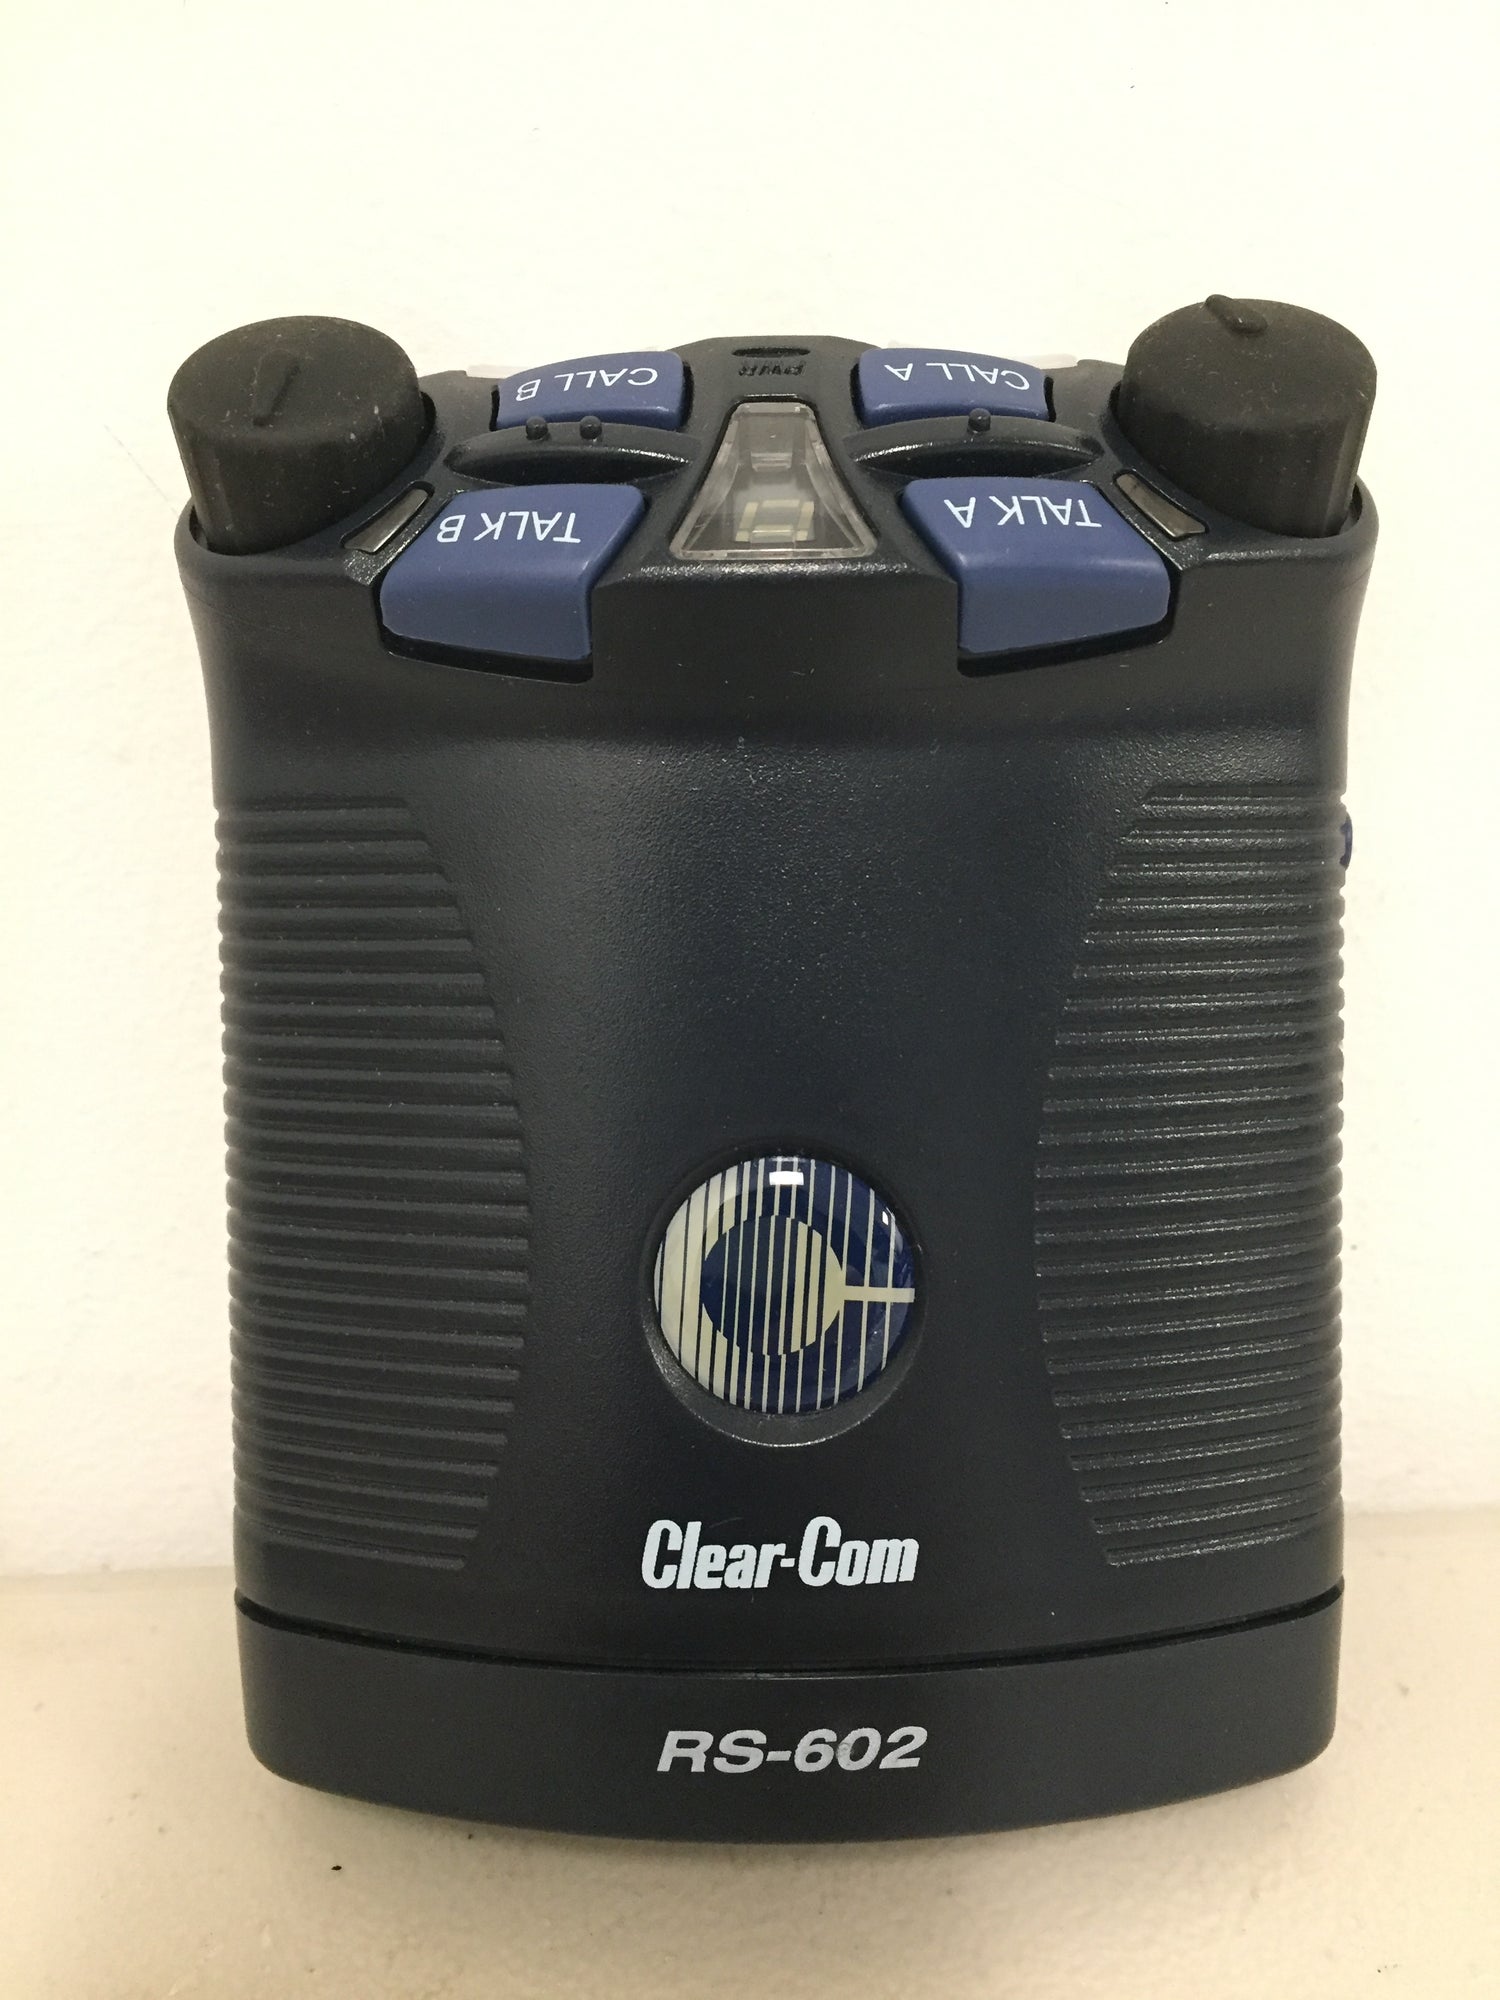 Used Clear-Com RS-602 2ch Wired Intercom Pack, We Sell Professional Audio Equipment. Audio Systems, Amplifiers, Consoles, Mixers, Electronics, Entertainment, Live Sound